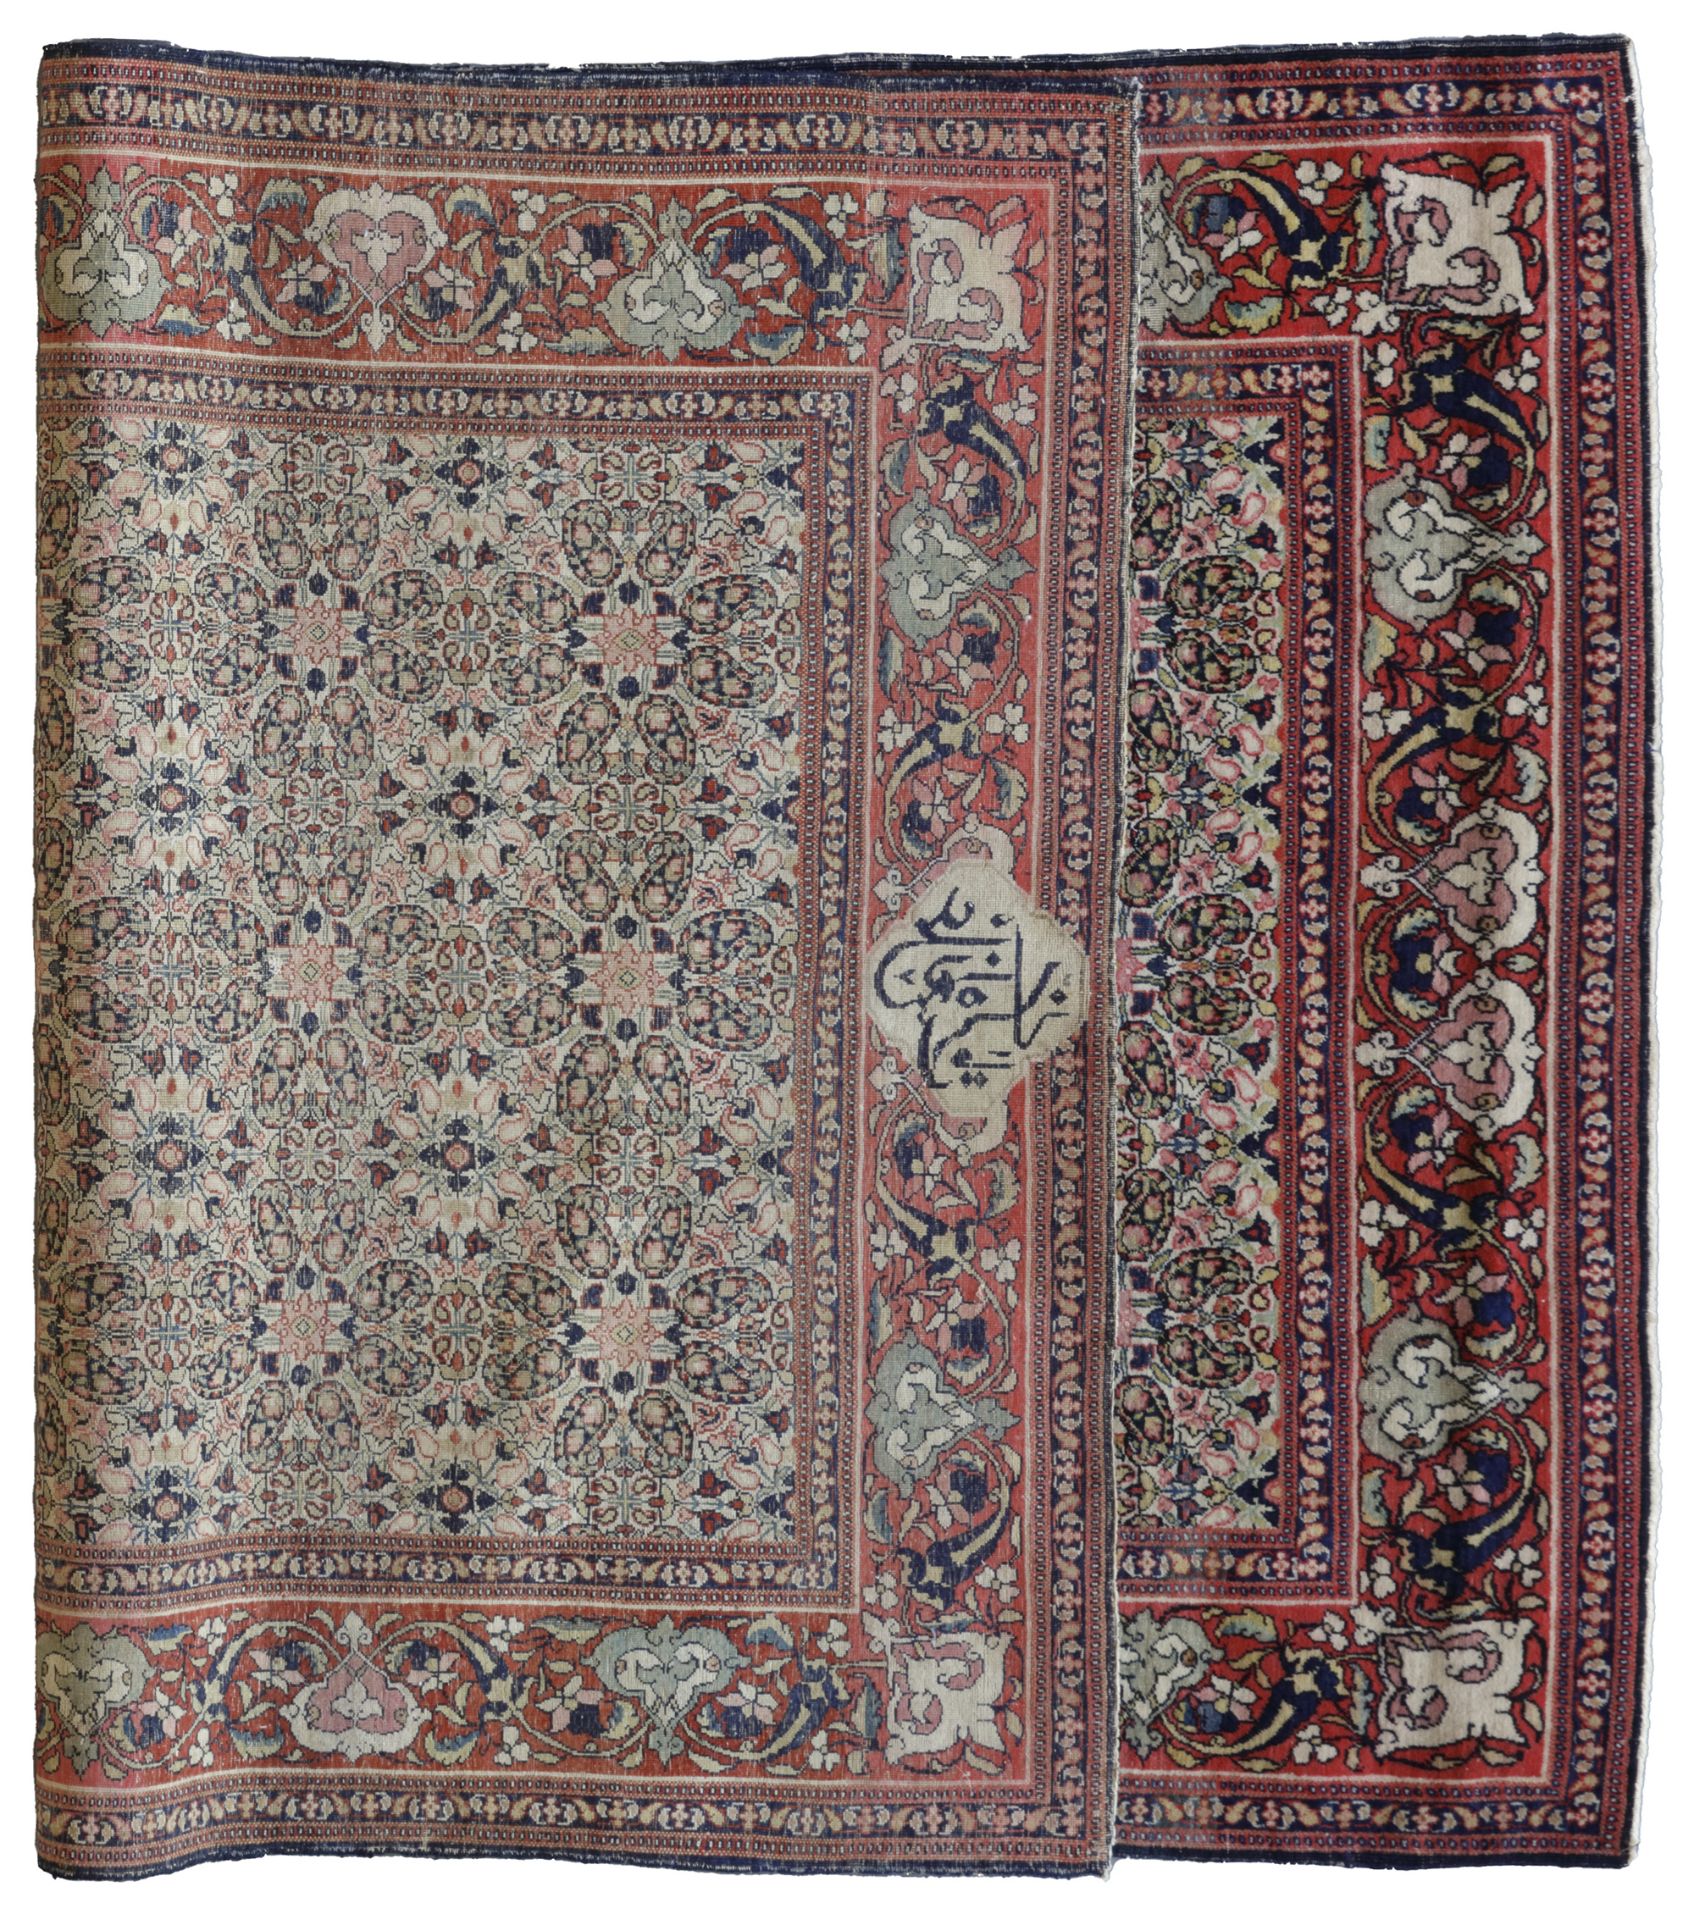 A SIGNED KERMAN RUG, PERSIA, LATE 19TH CENTURY - Image 2 of 2